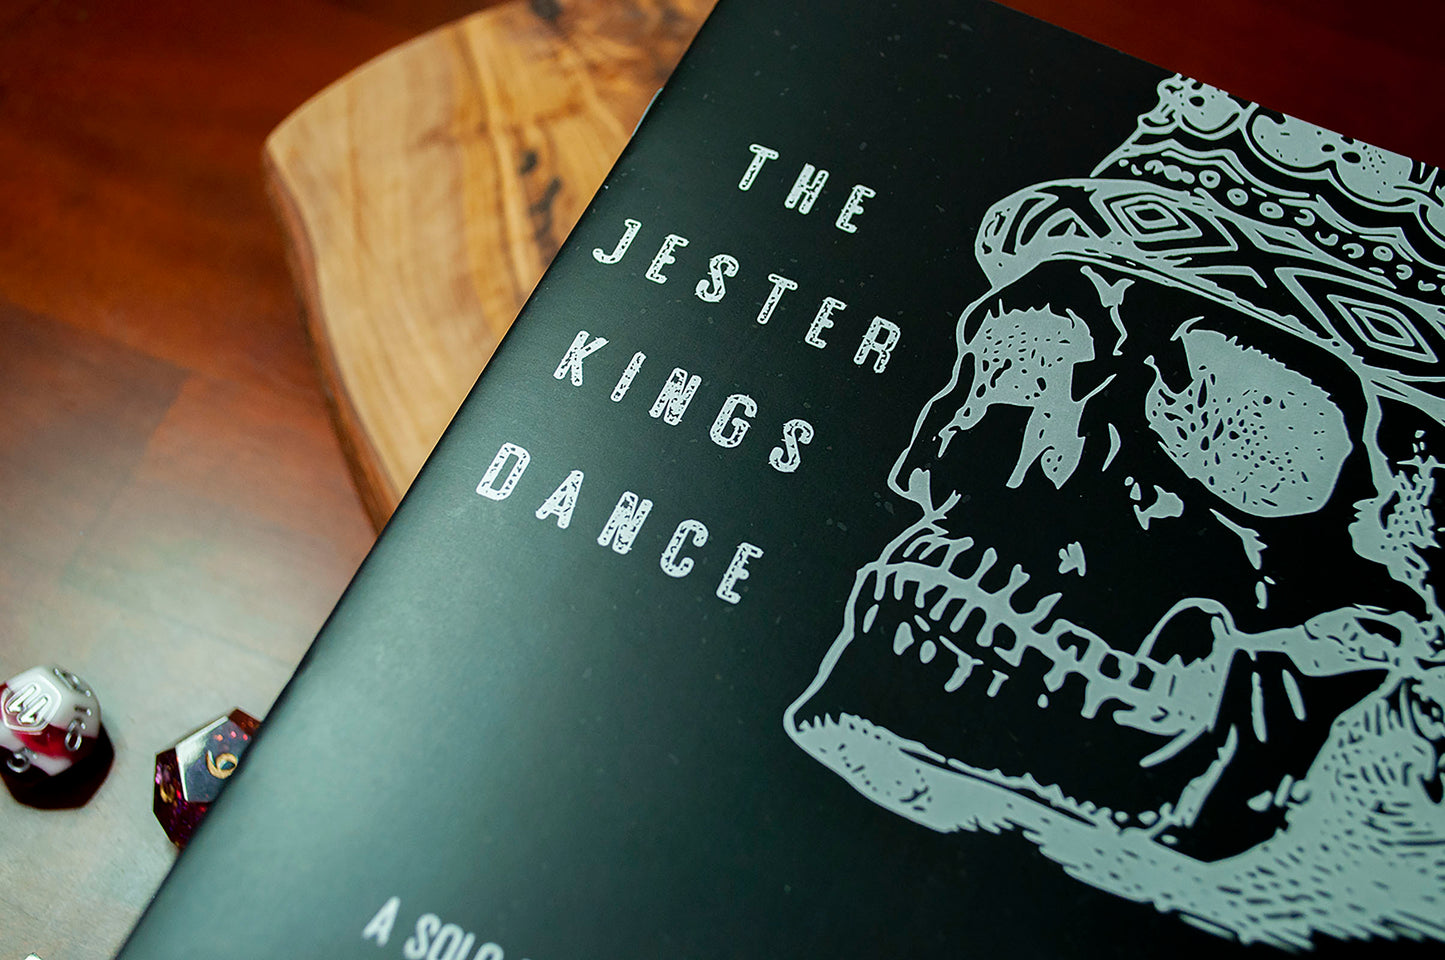 The Jester King's Dance